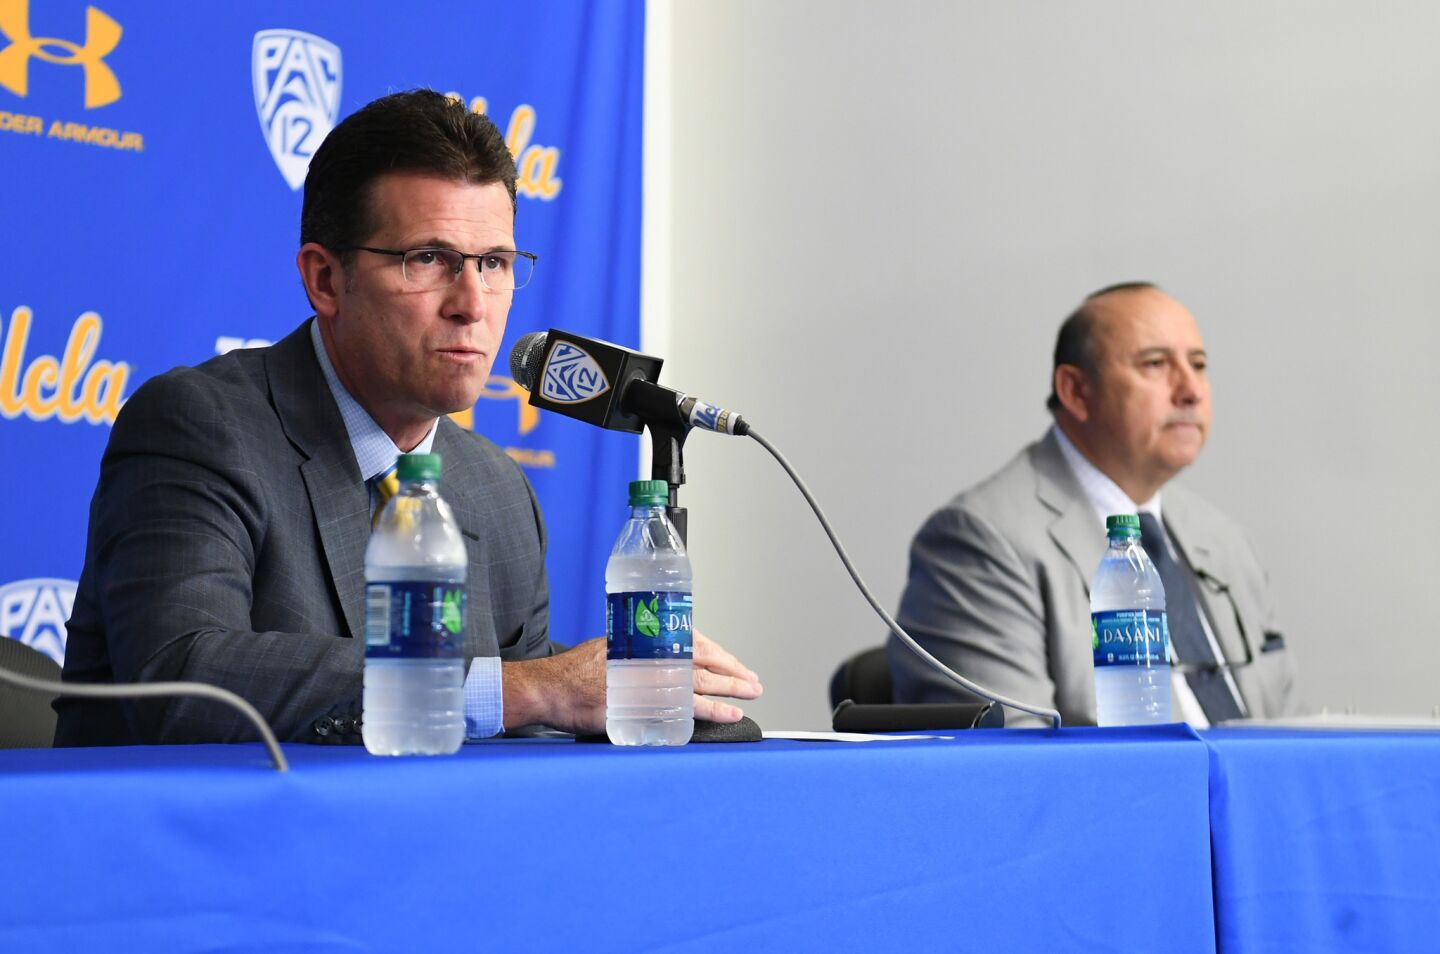 UCLA basketball head coach Steve Alford announces all three players are suspended during a news conference at Pauley Pavilion. At right is Dan Guerrero, athletic director.